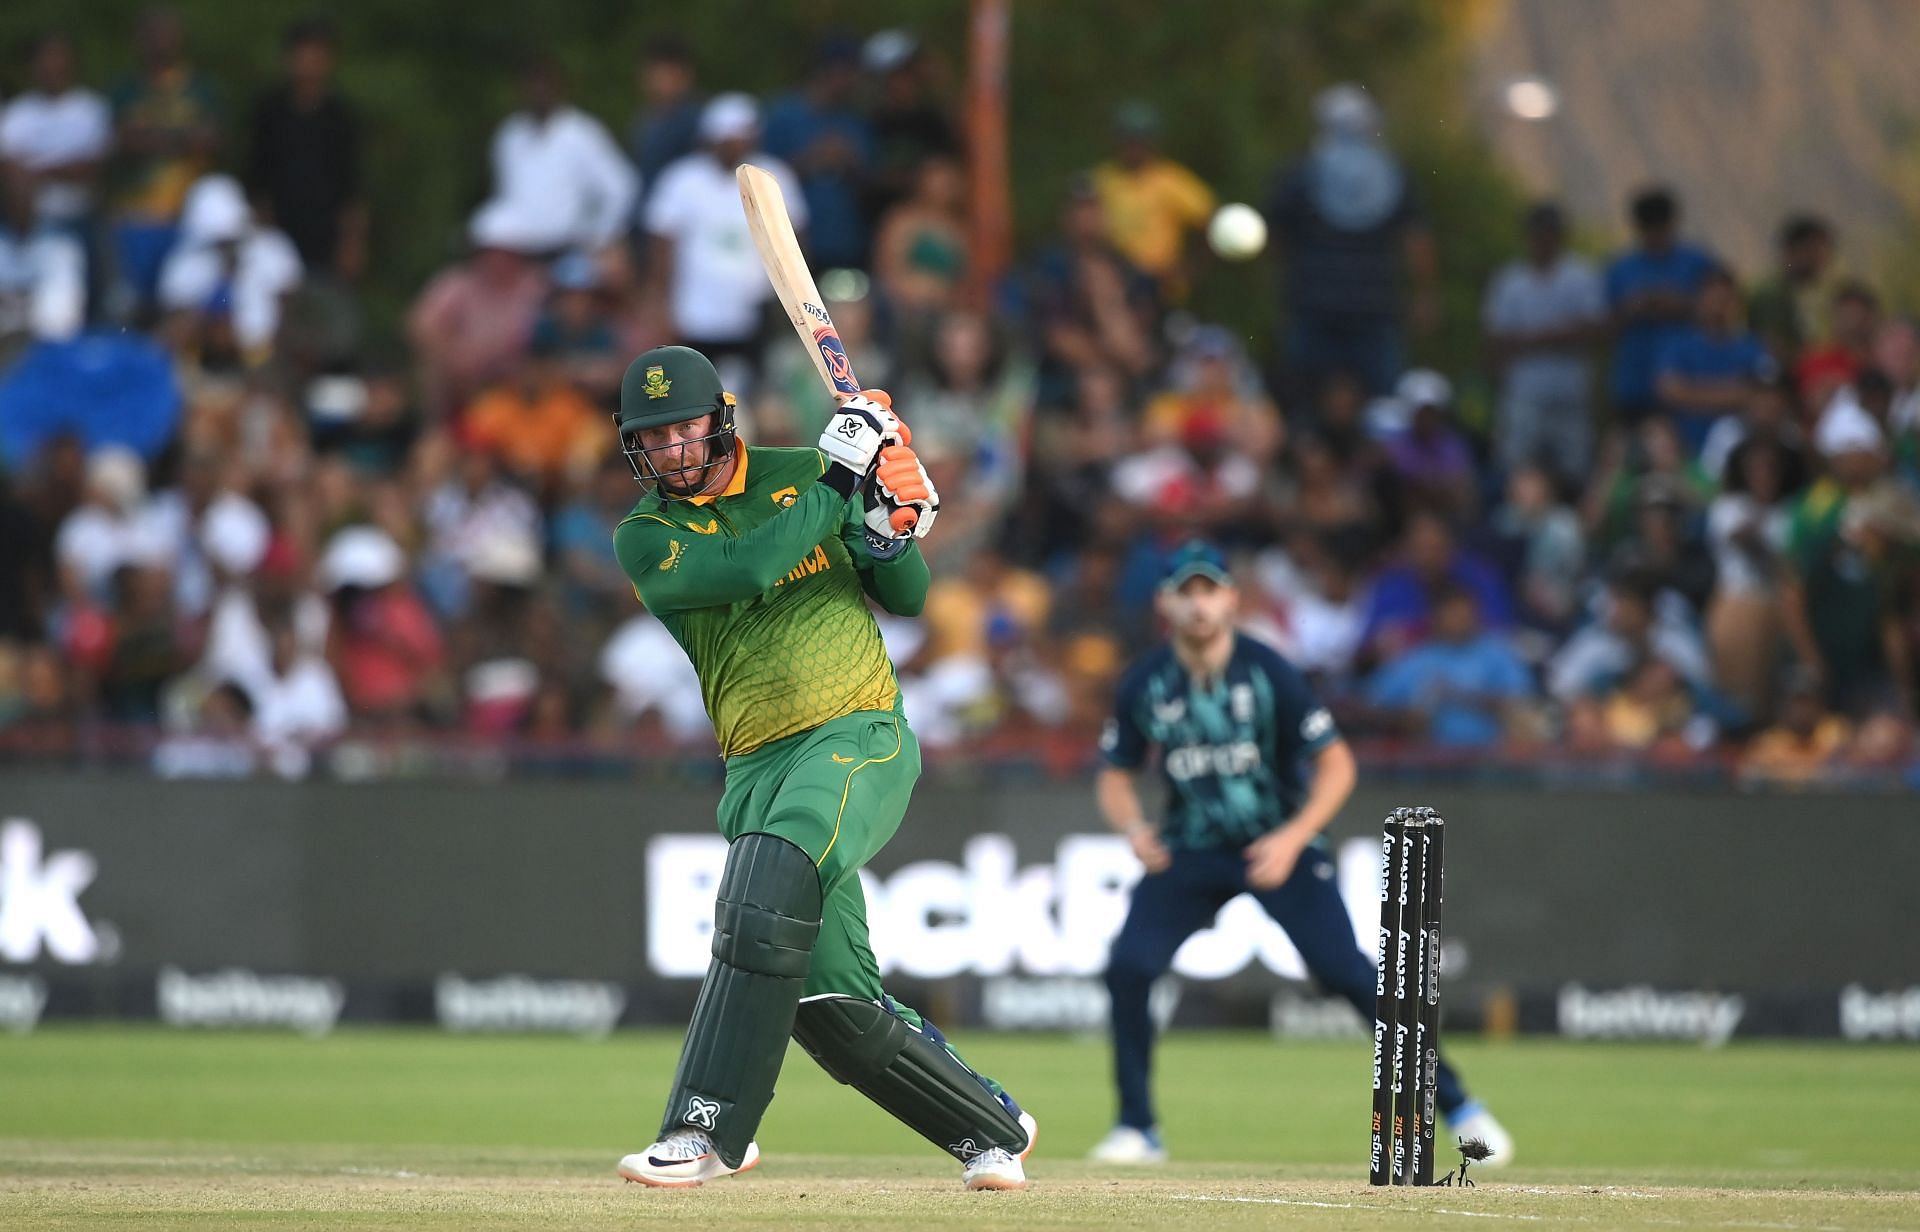 South Africa earned 20 points in the ICC Cricket World Cup Super League points table from the series against England. (Image: Getty)